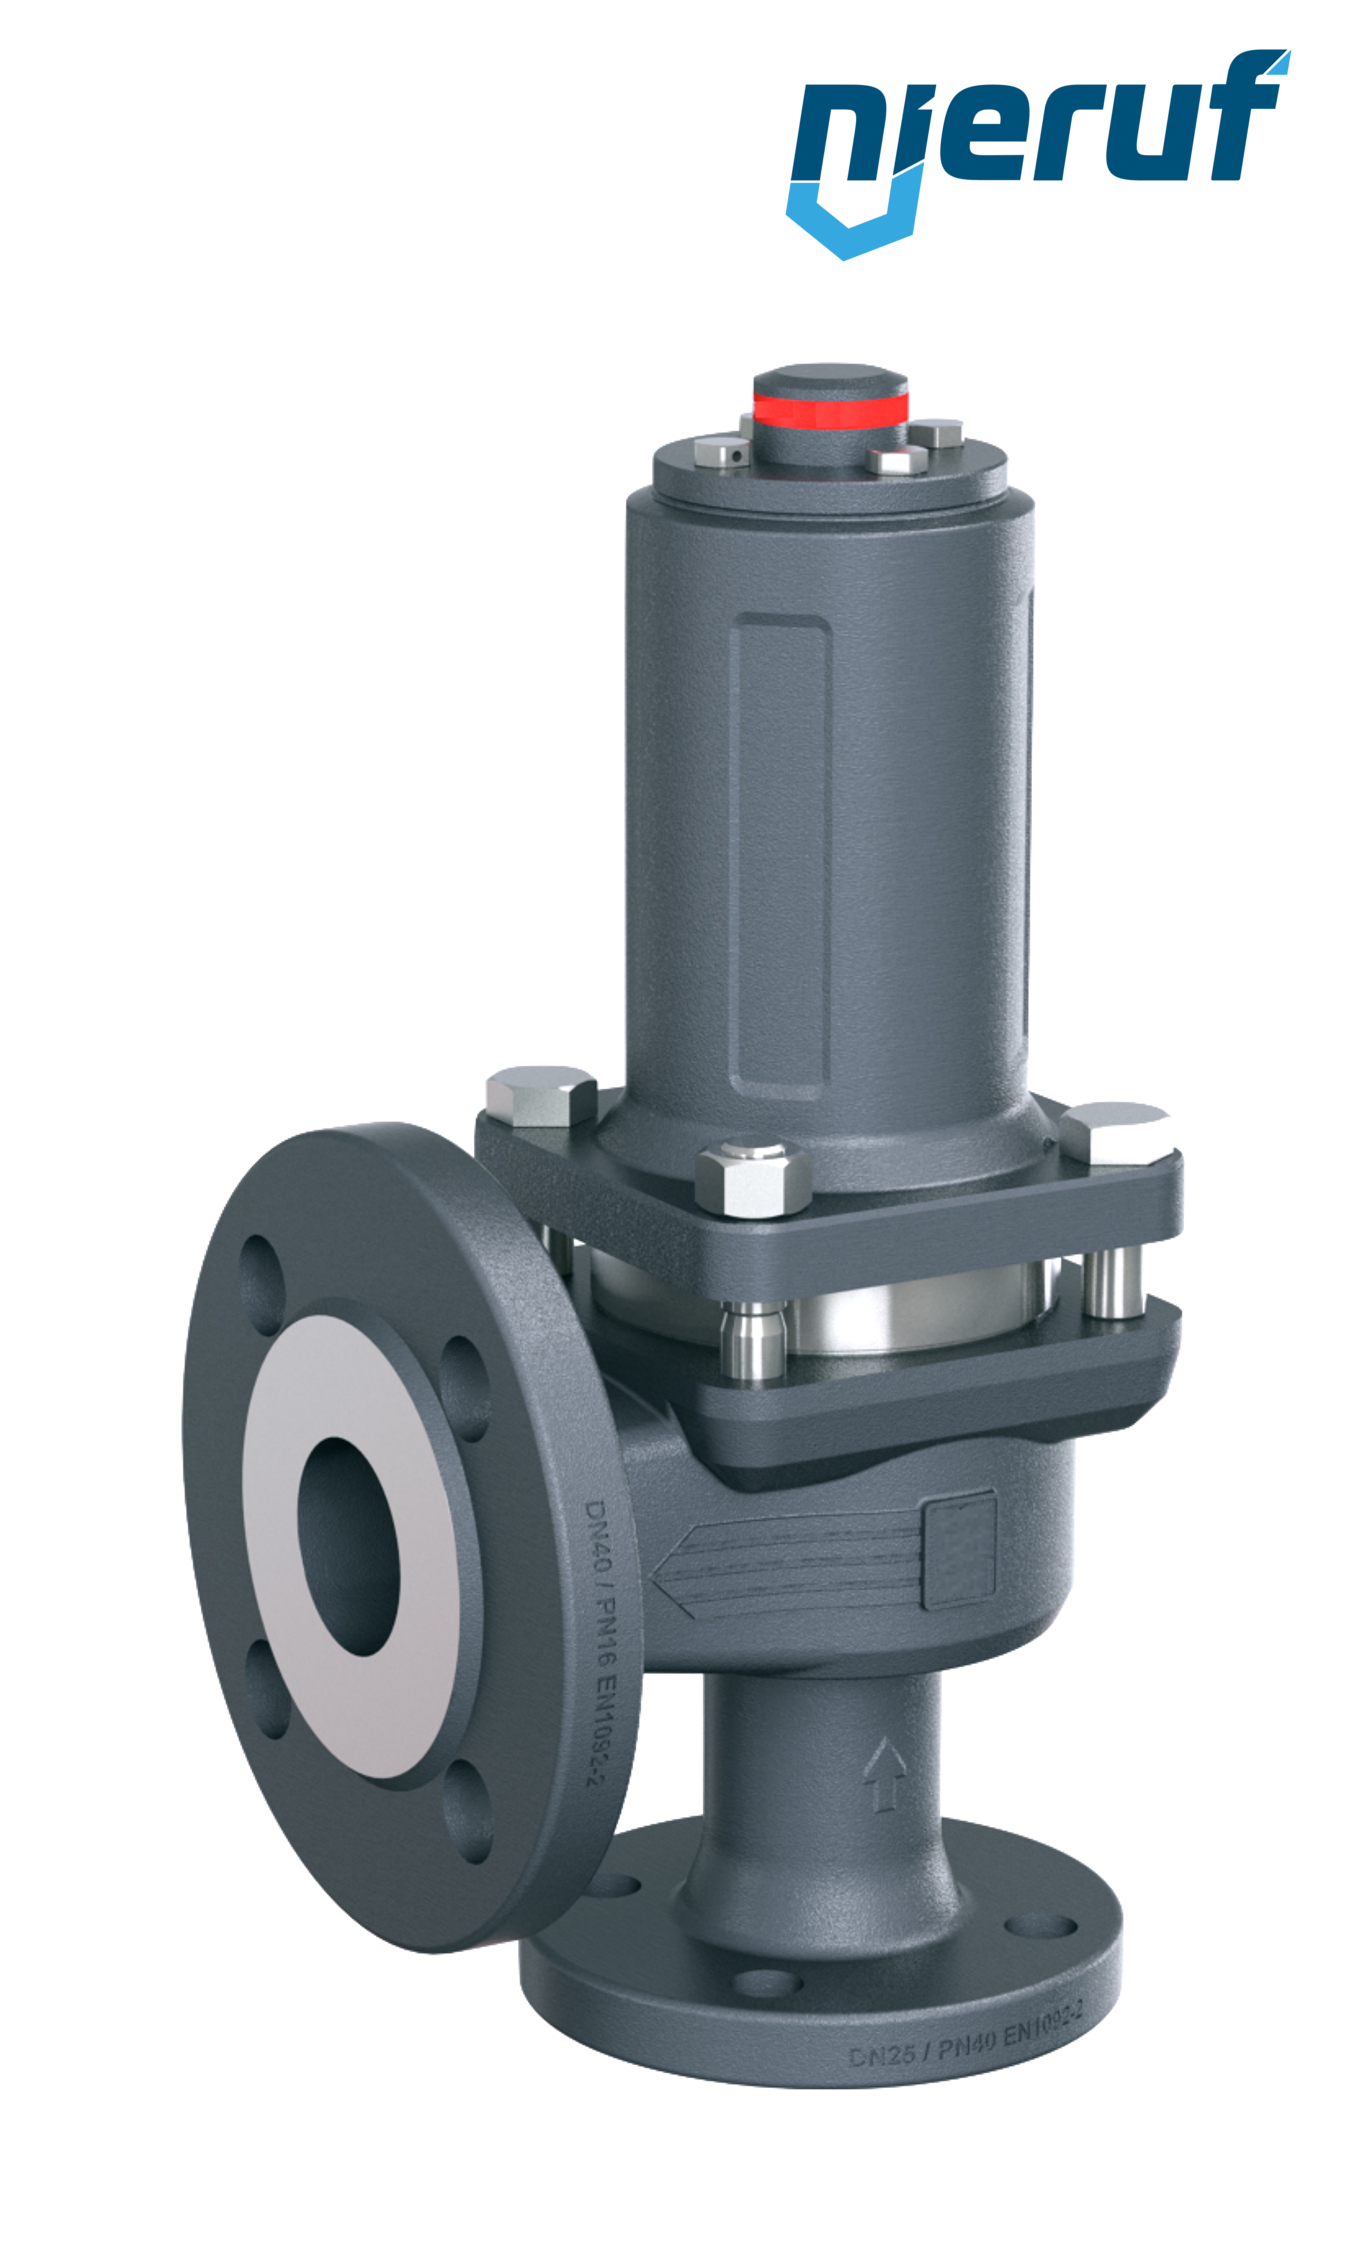 flange-safety valve DN50/DN80 SF06, gastight bonnet EPDM, without lifting device